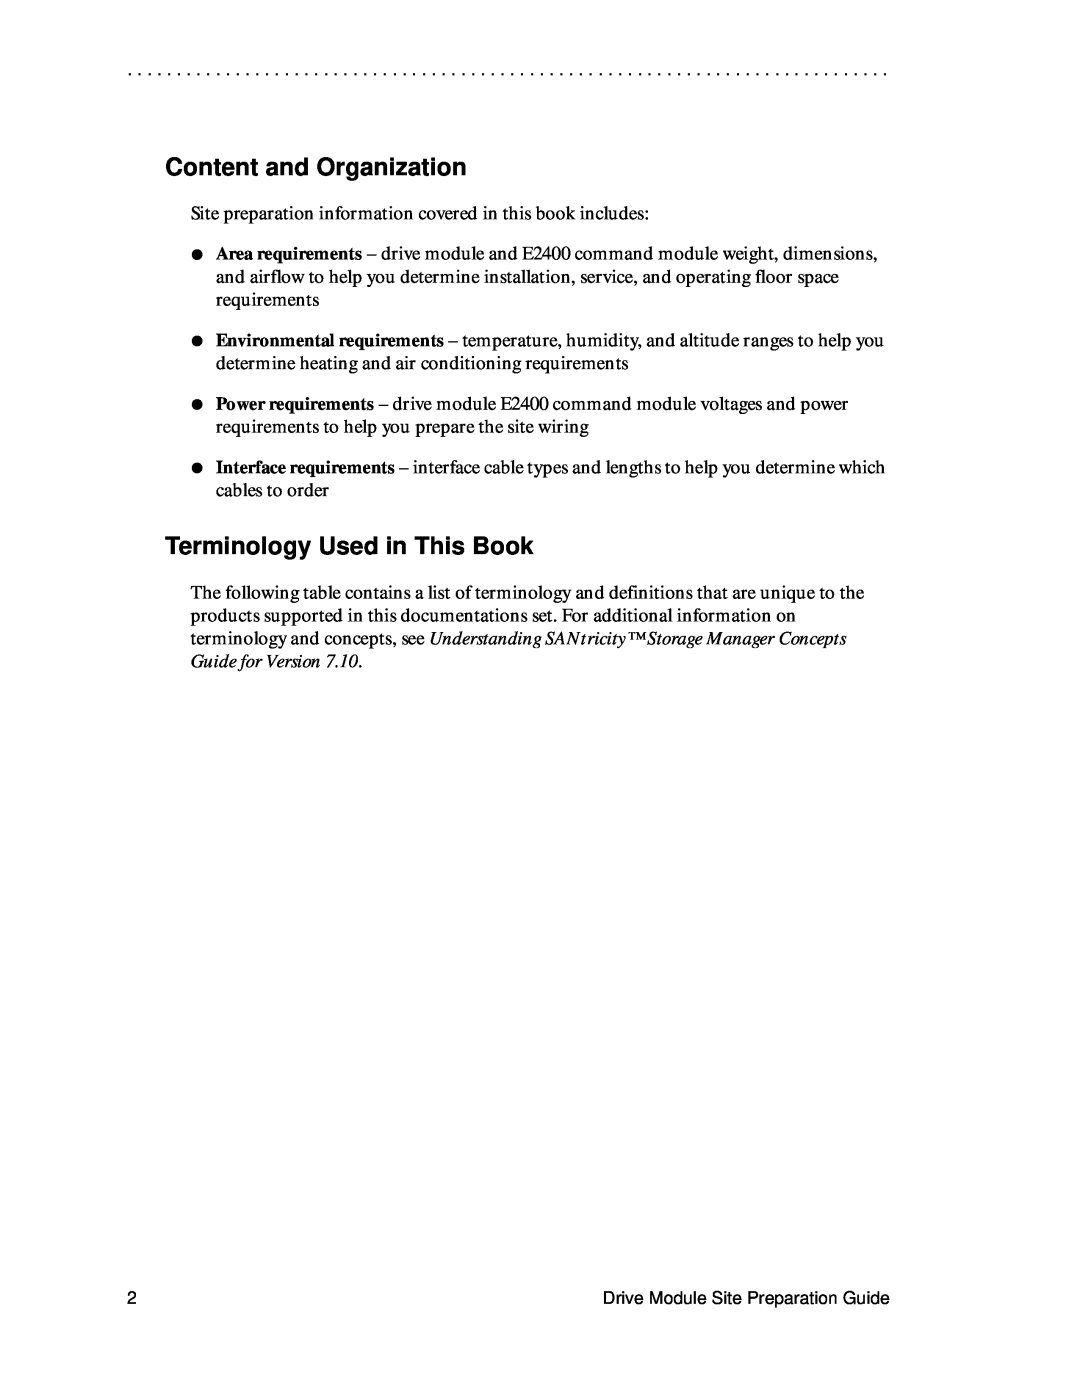 LSI DF1153-E1 manual Content and Organization, Terminology Used in This Book 